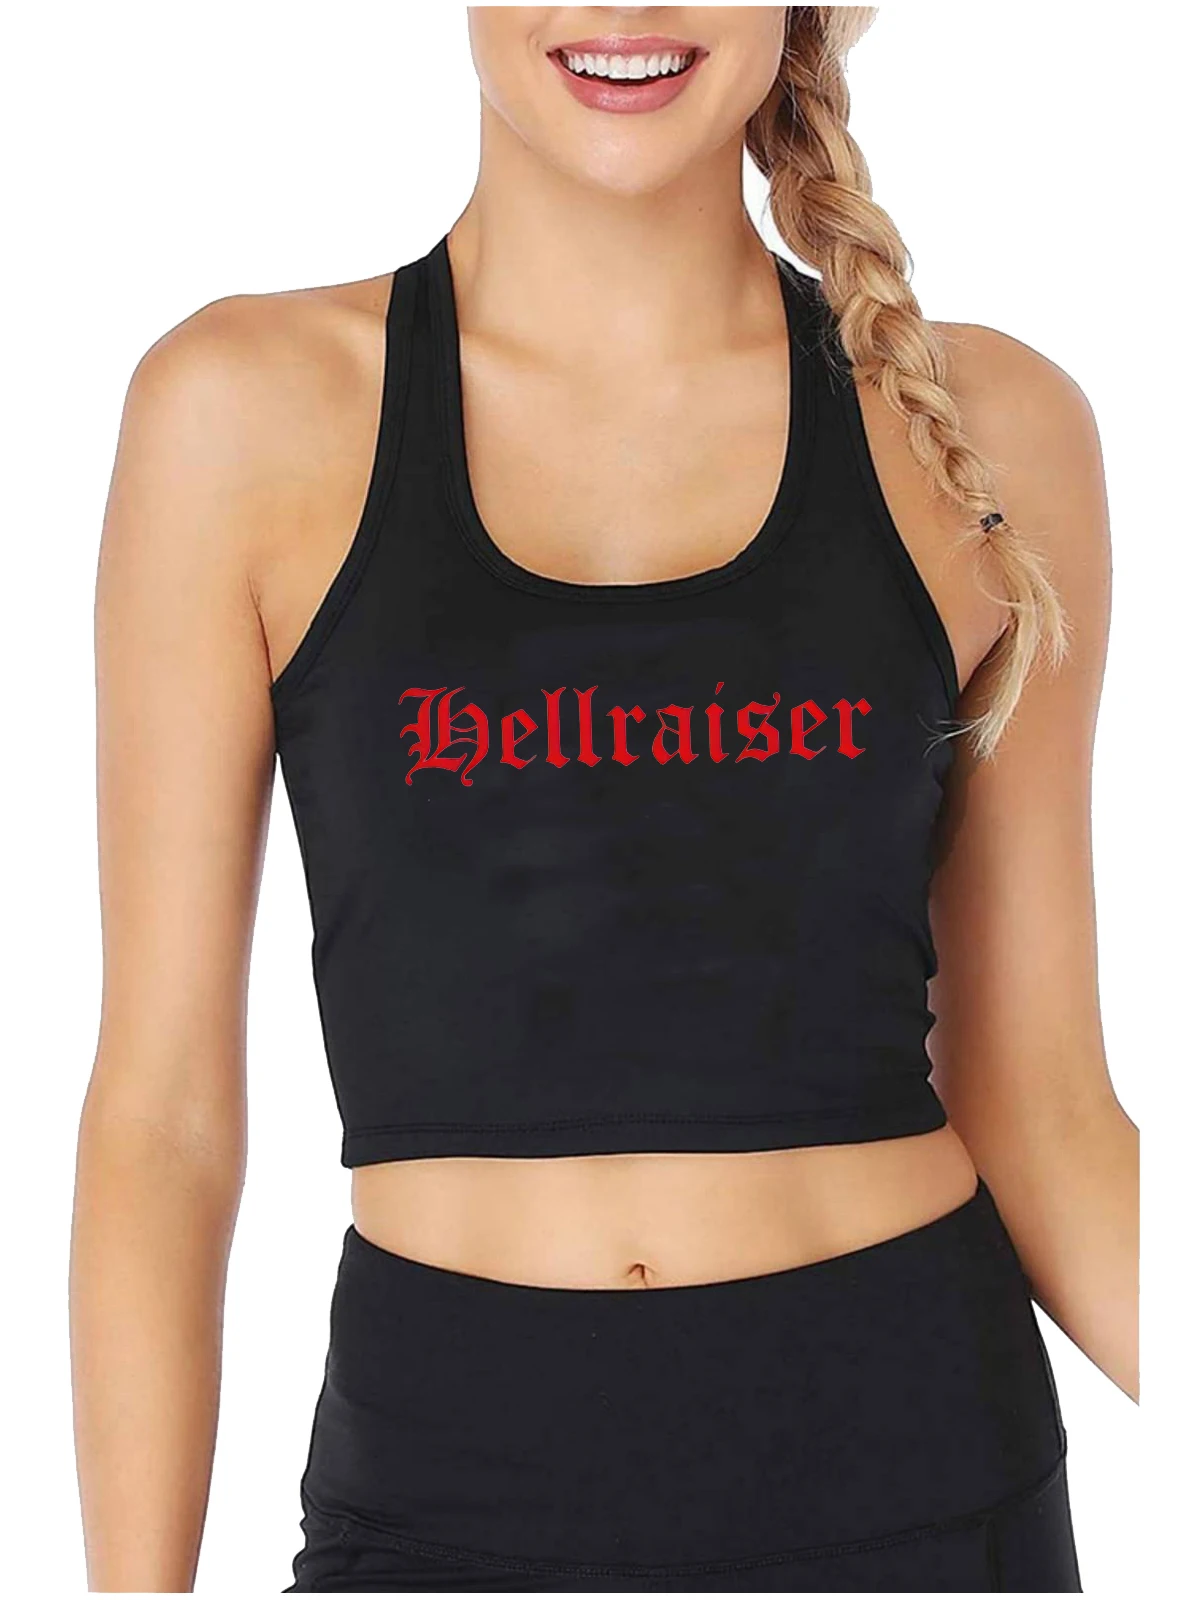 

Hellraiser Graphic Sexy Slim Fit Crop Top Women's Fashion Novel Sports Training Tank Tops Gothic Naughty Camisole